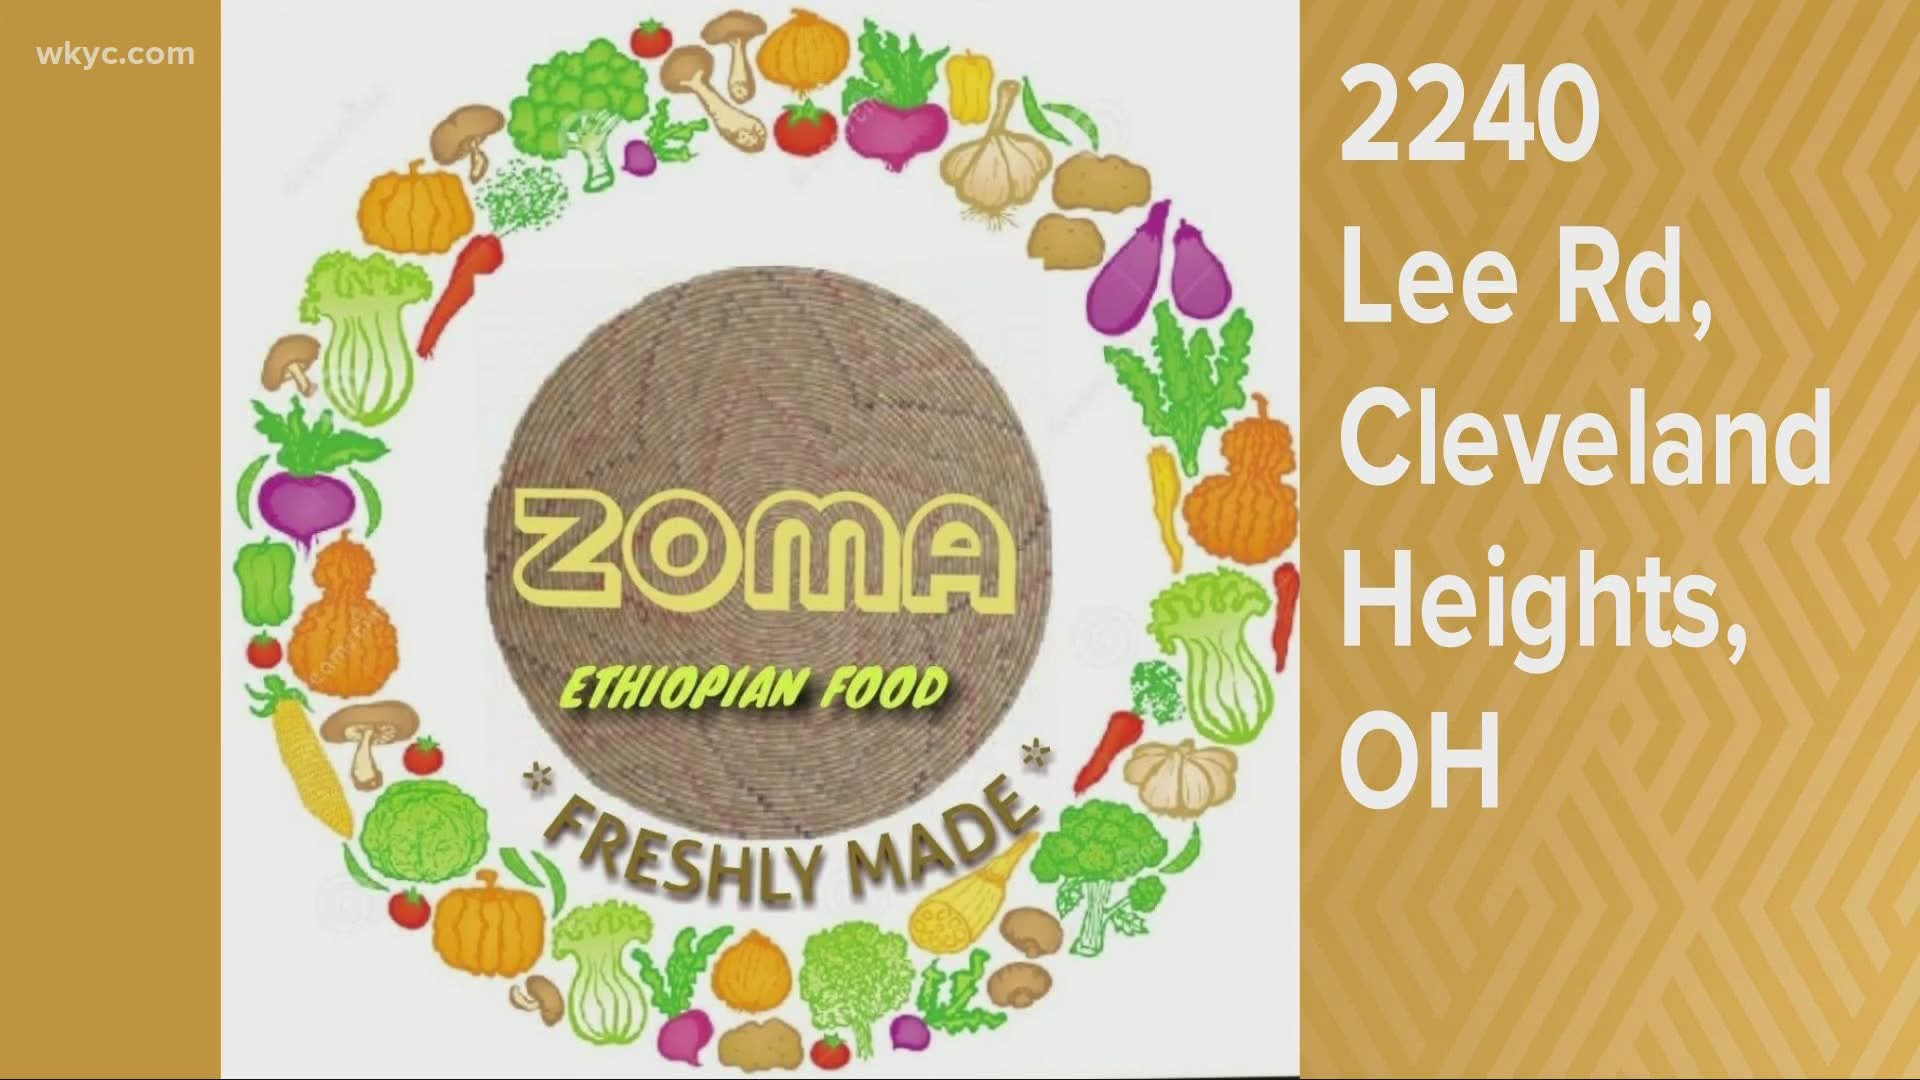 Four years ago, Zeleke Belete opened Zoma in Cleveland Heights. It is one of only two Ethiopian restaurants in the city.